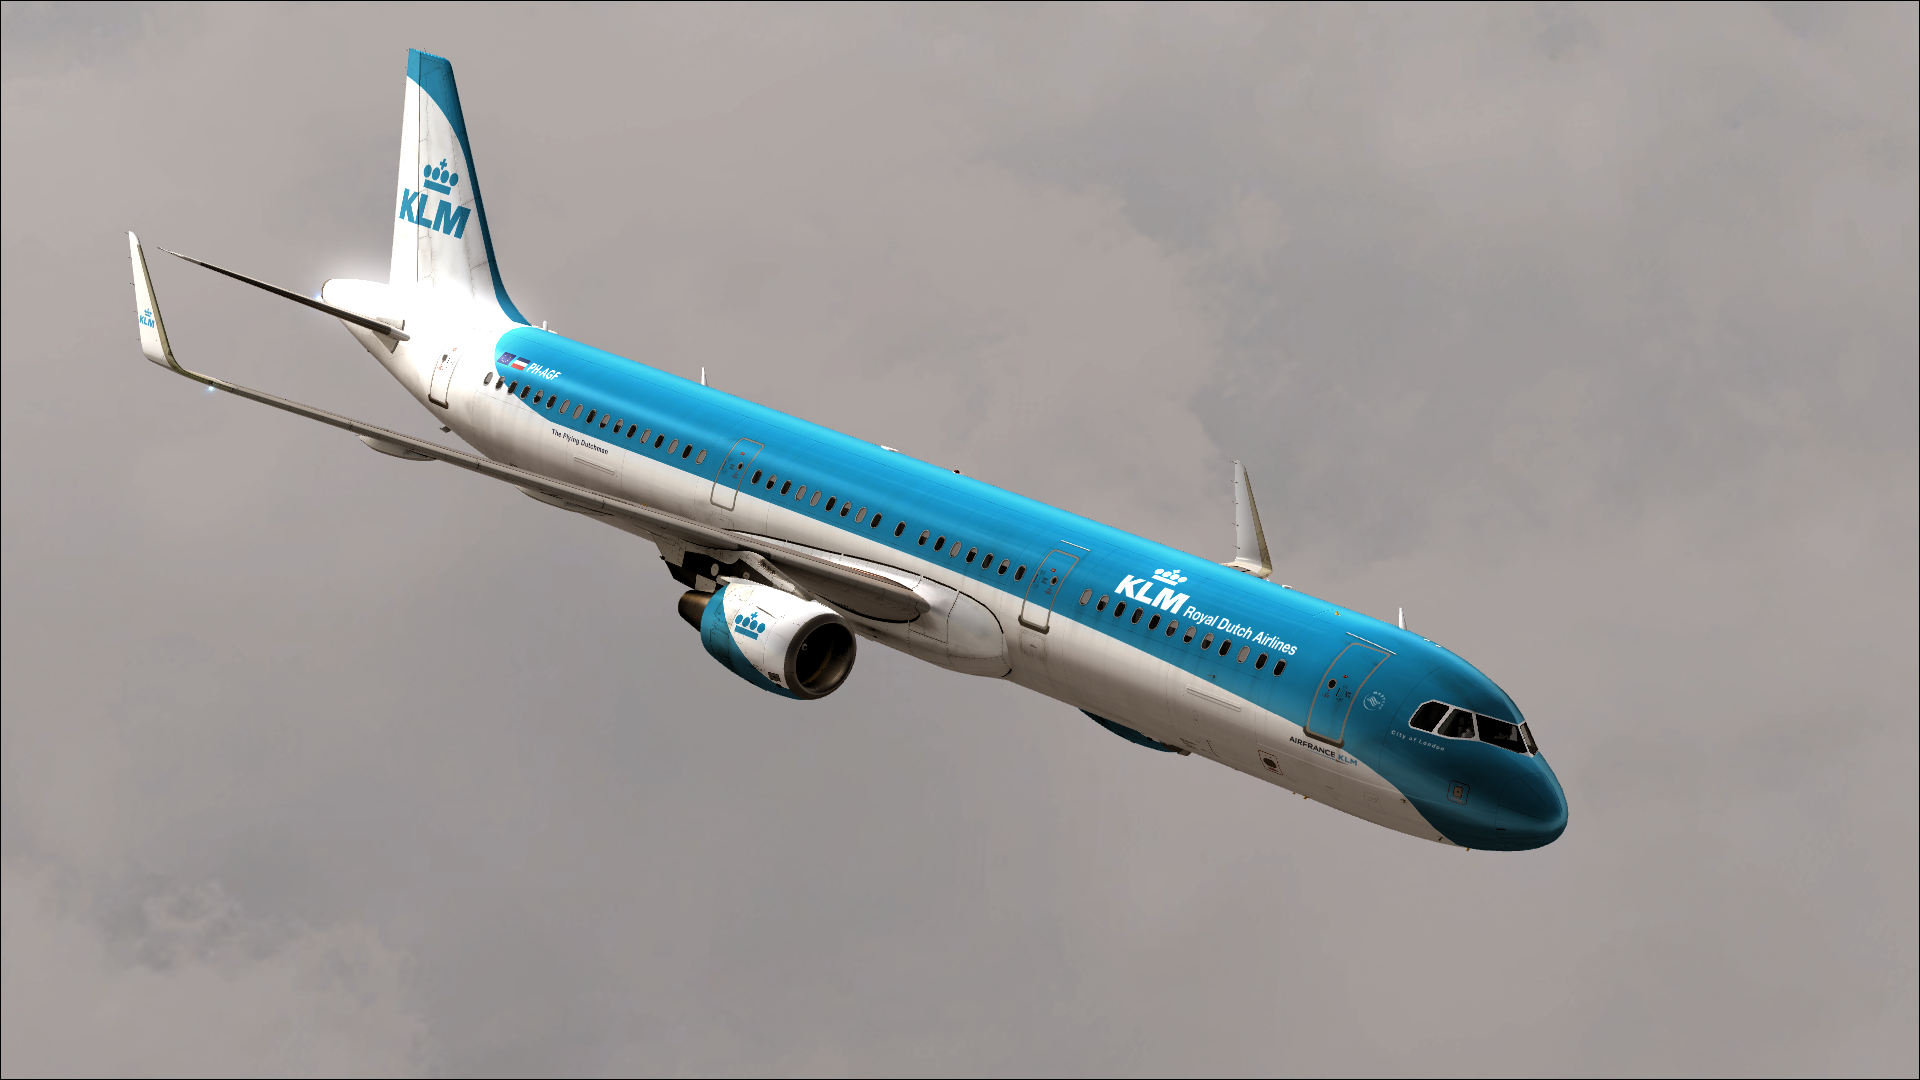 Klm Airlines Airbus A321 200 Passenger Aircraft Wallpapers And Images ...